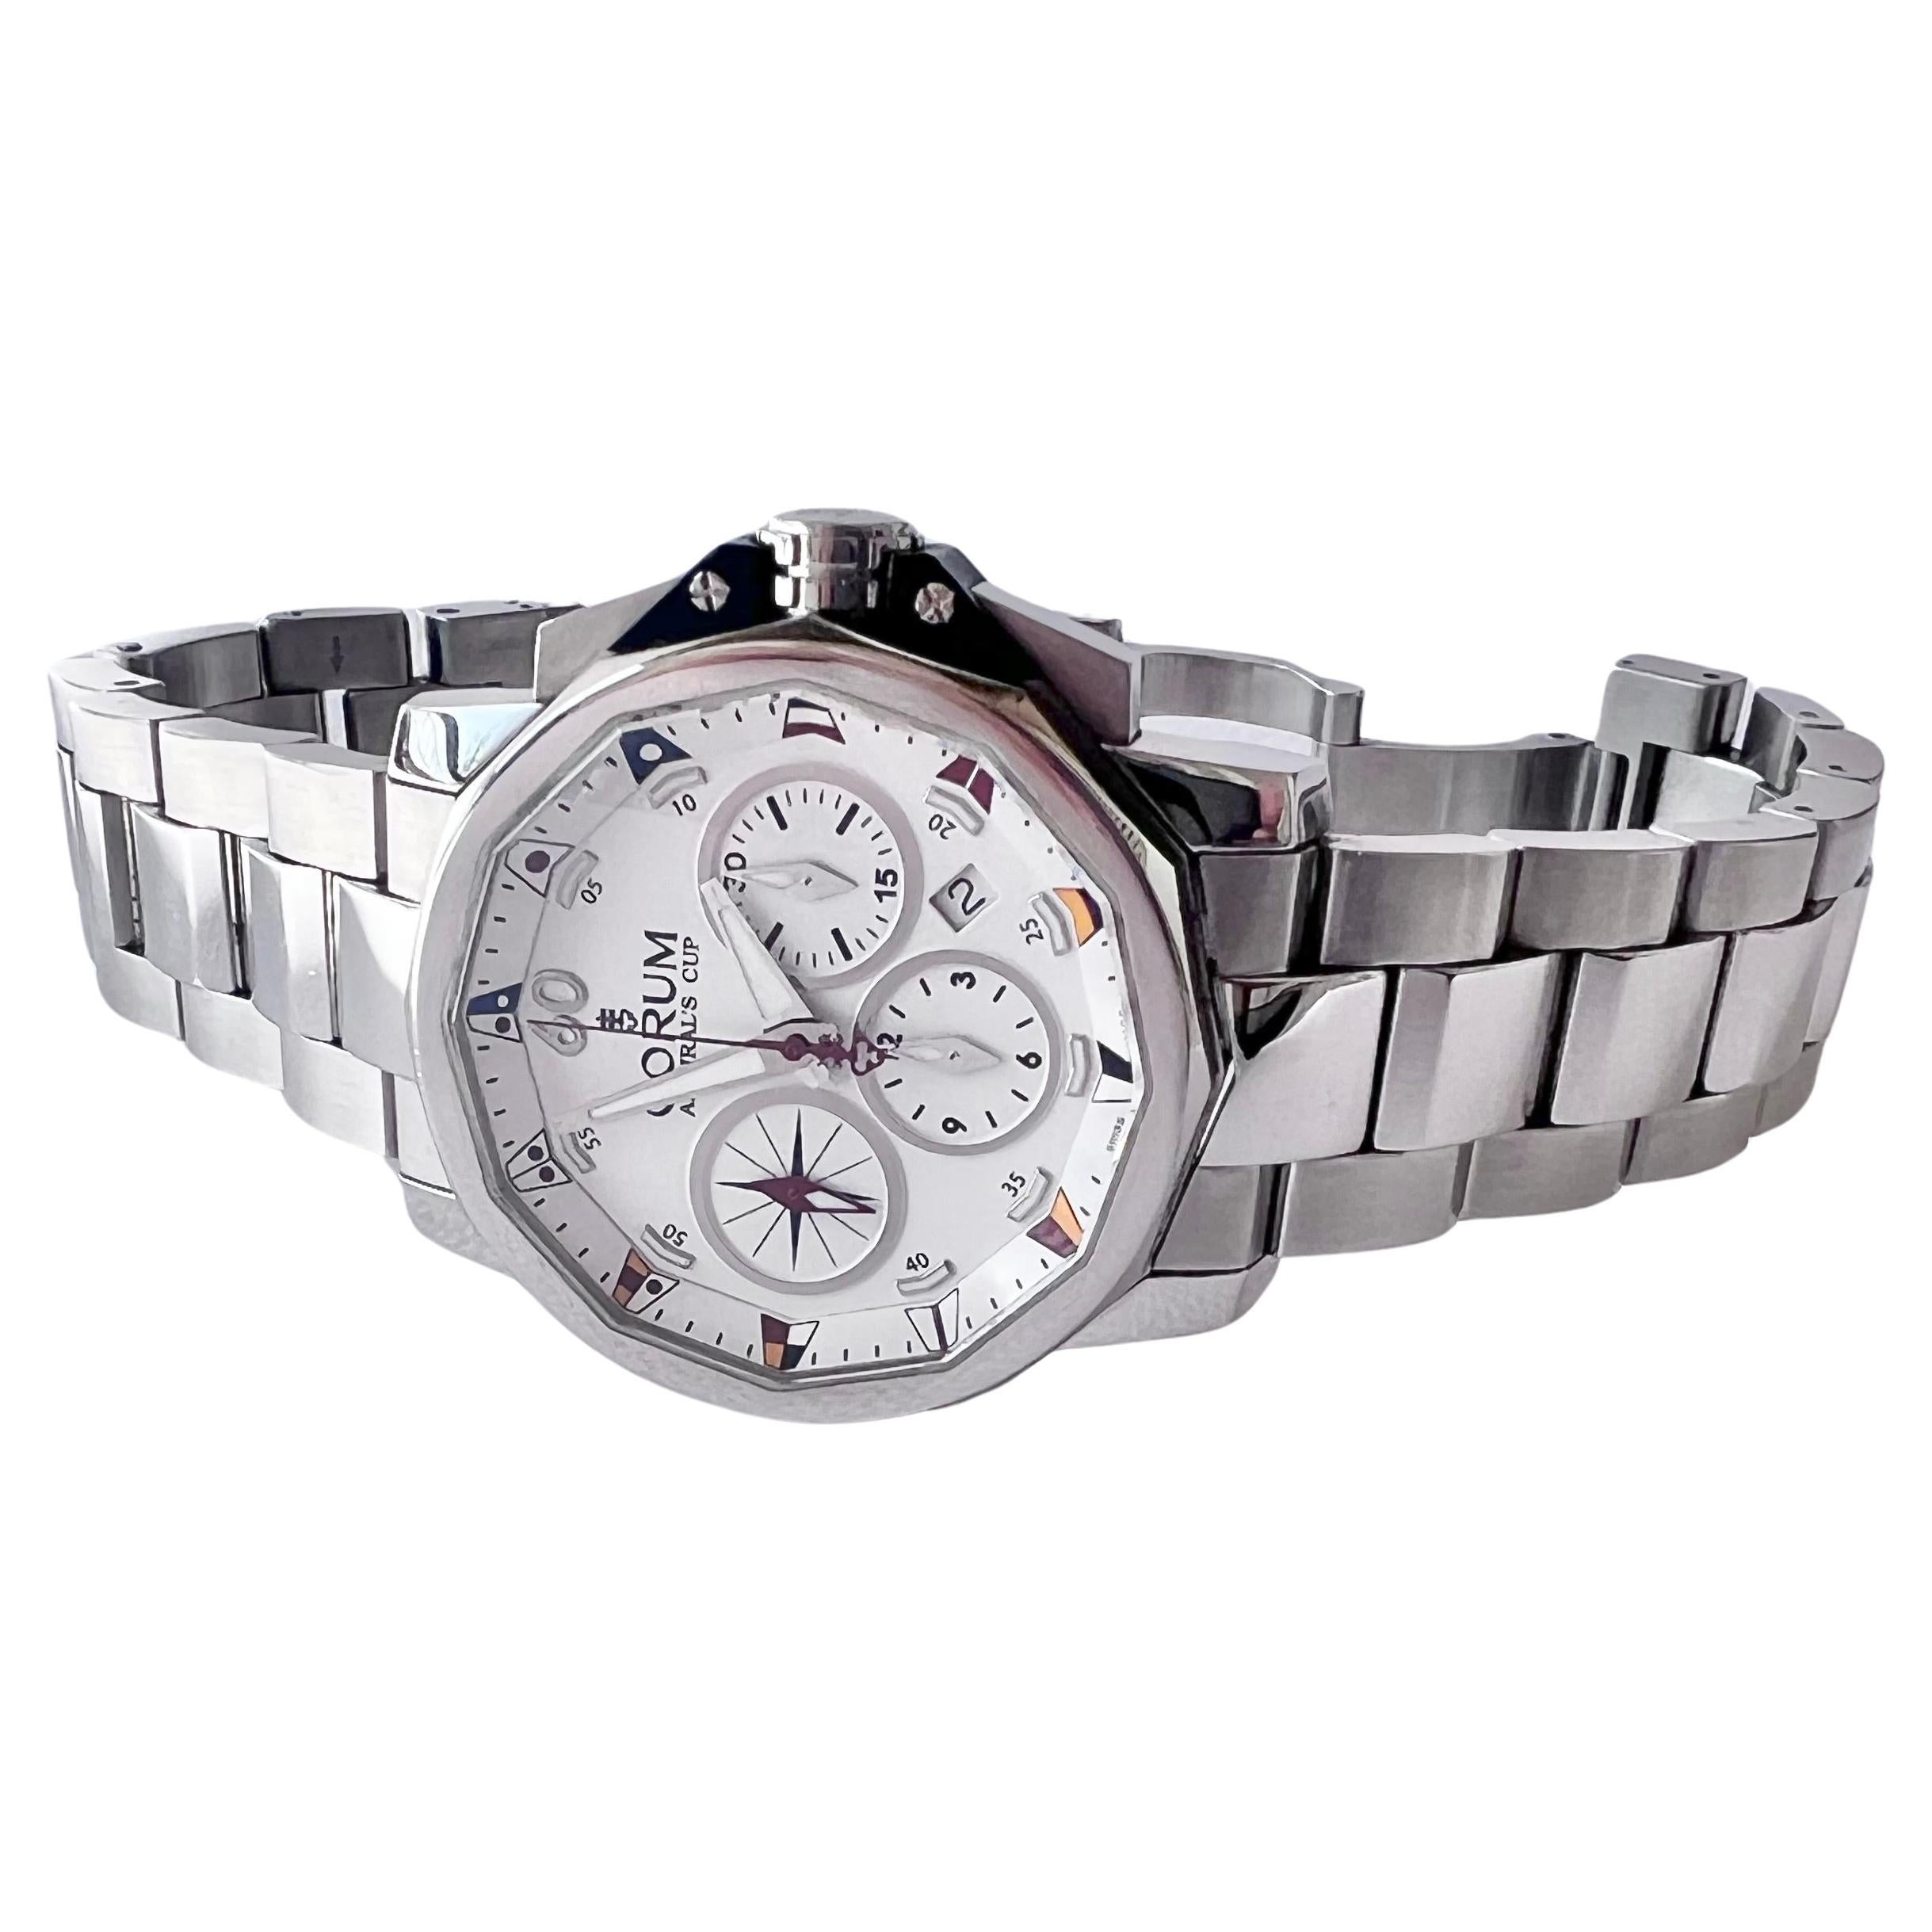 Corum Admiral's Cup 01.0007 Chronograph Stainless Steel Automatic Men Watch For Sale